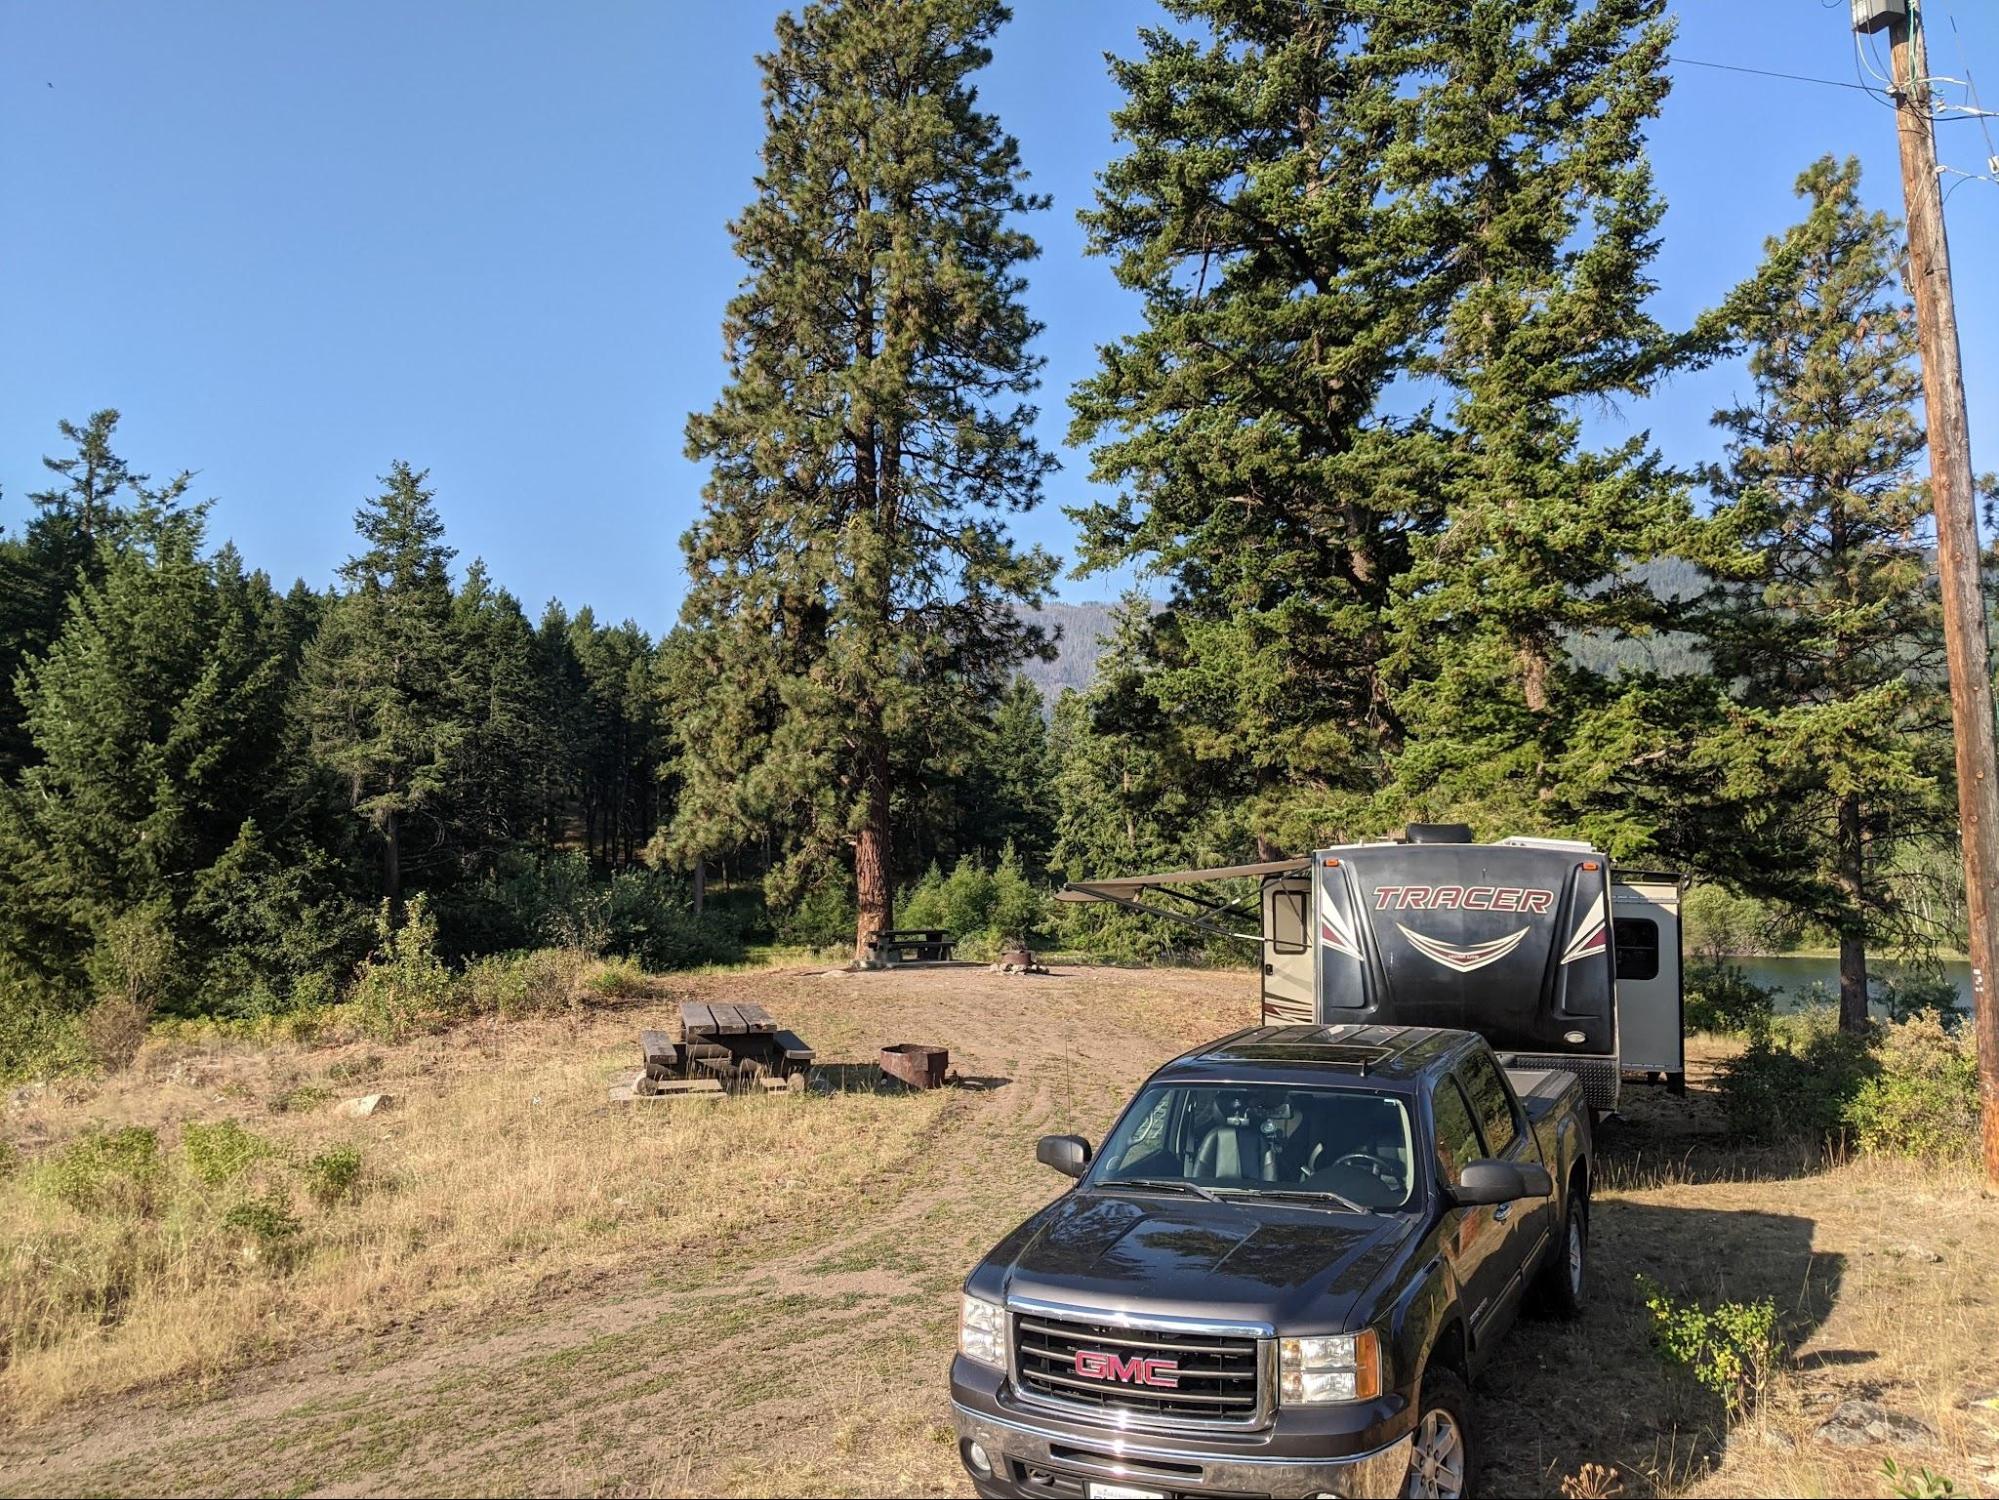 Our travel trailer at the Burnell Rec Site near Oliver, BC. We had a picnic table, fire pit, and there were outhouses/pit toilets available. Then entire site is user maintained and free to camp. 